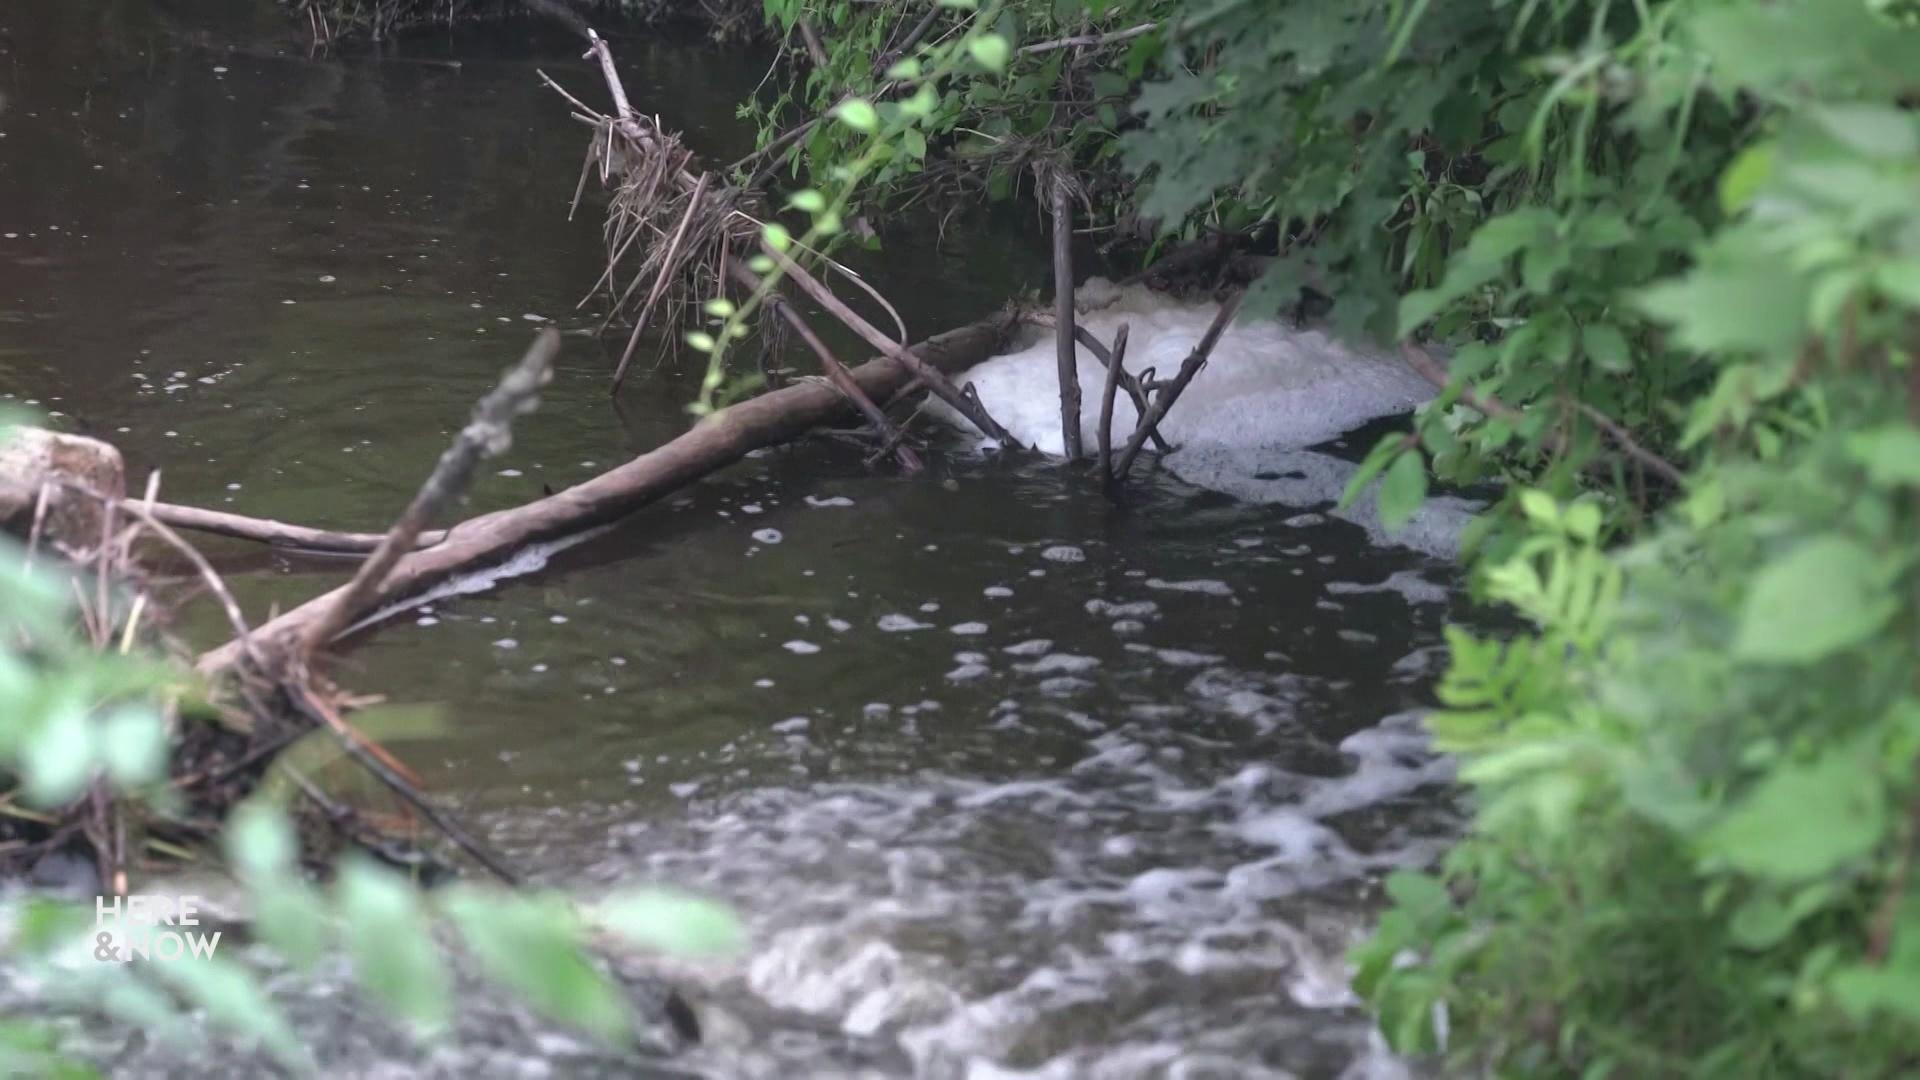 A local court ruling on PFAS cleanup